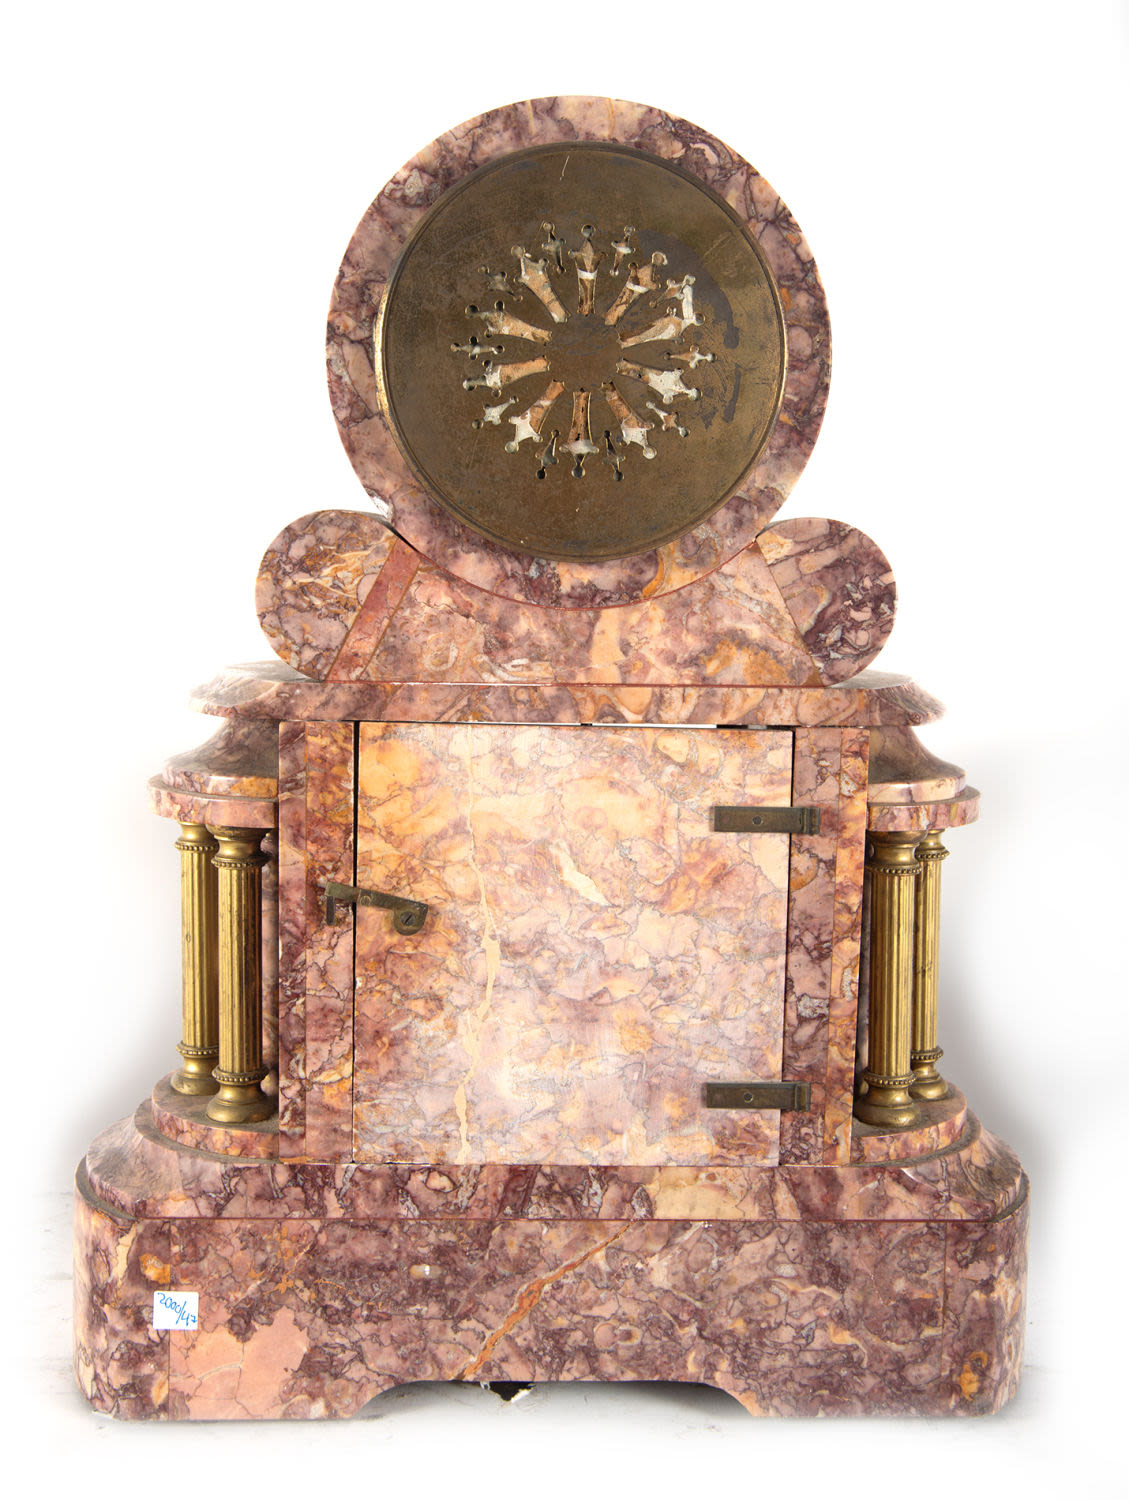 garniture in pink marble and gilt bronze, with mercury pendulum - Image 4 of 13